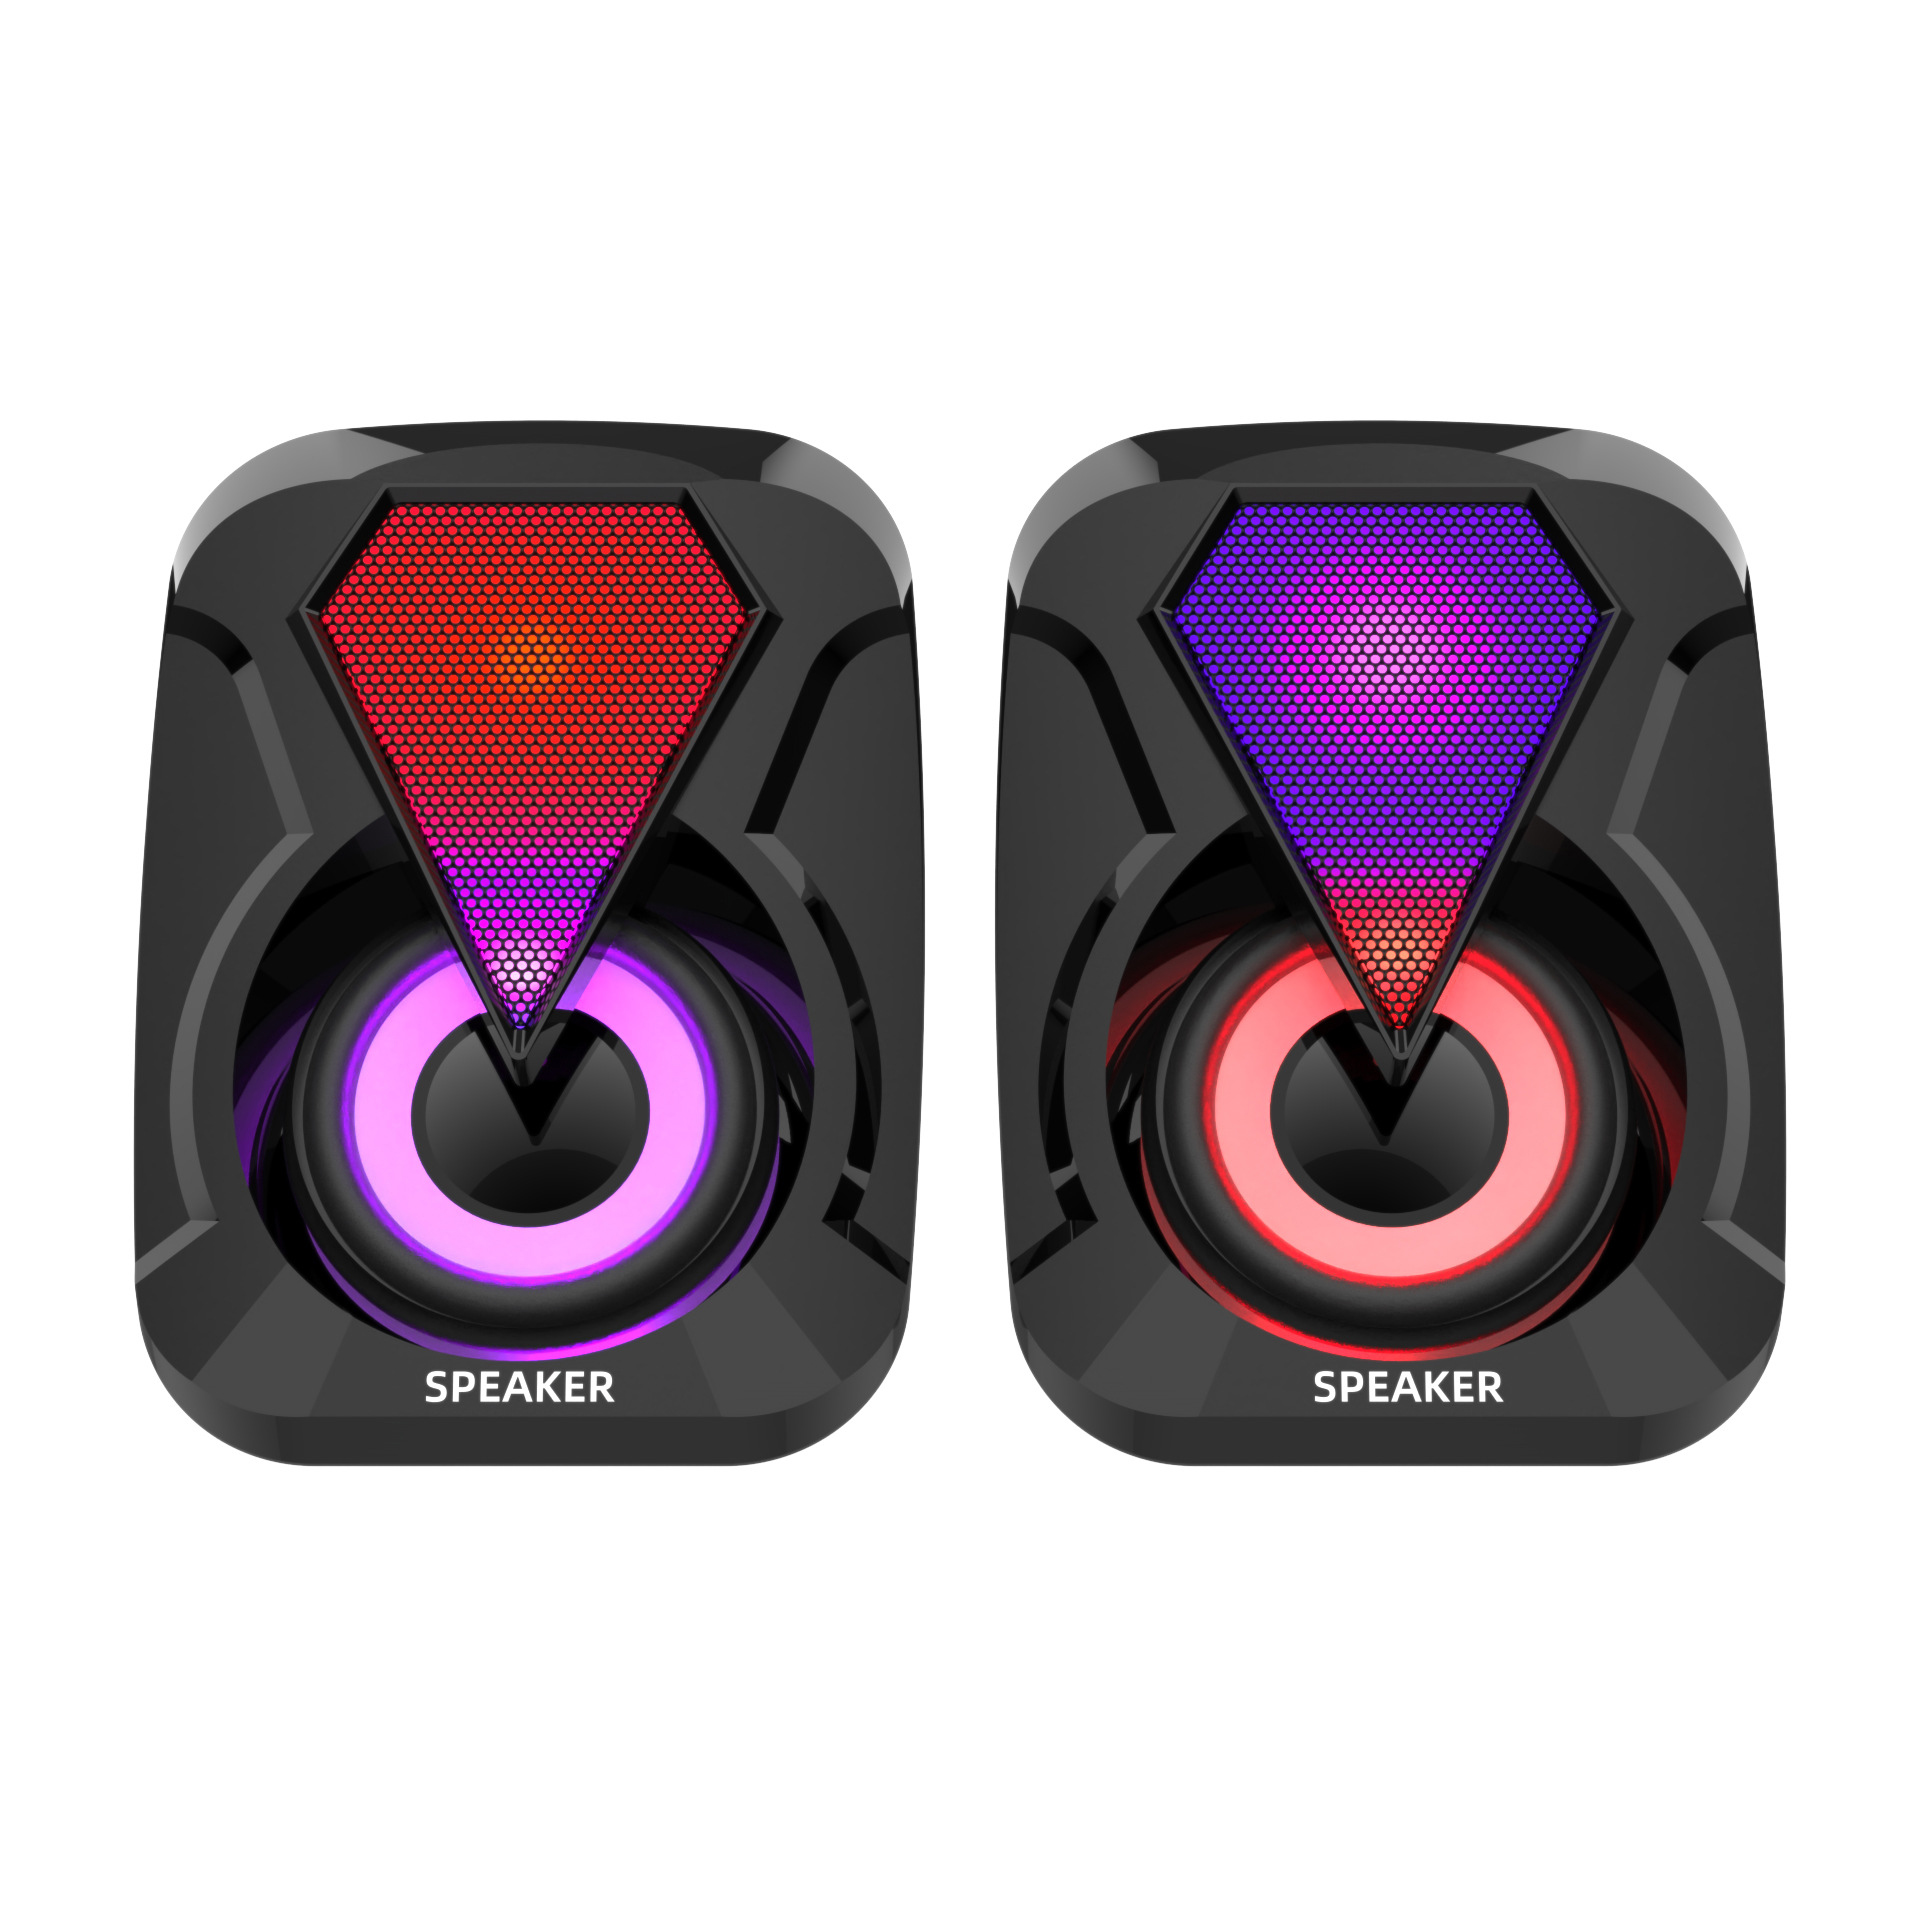 new dual louder speakers for PC gamming with RGB light 2.0 laptop speaker usb input